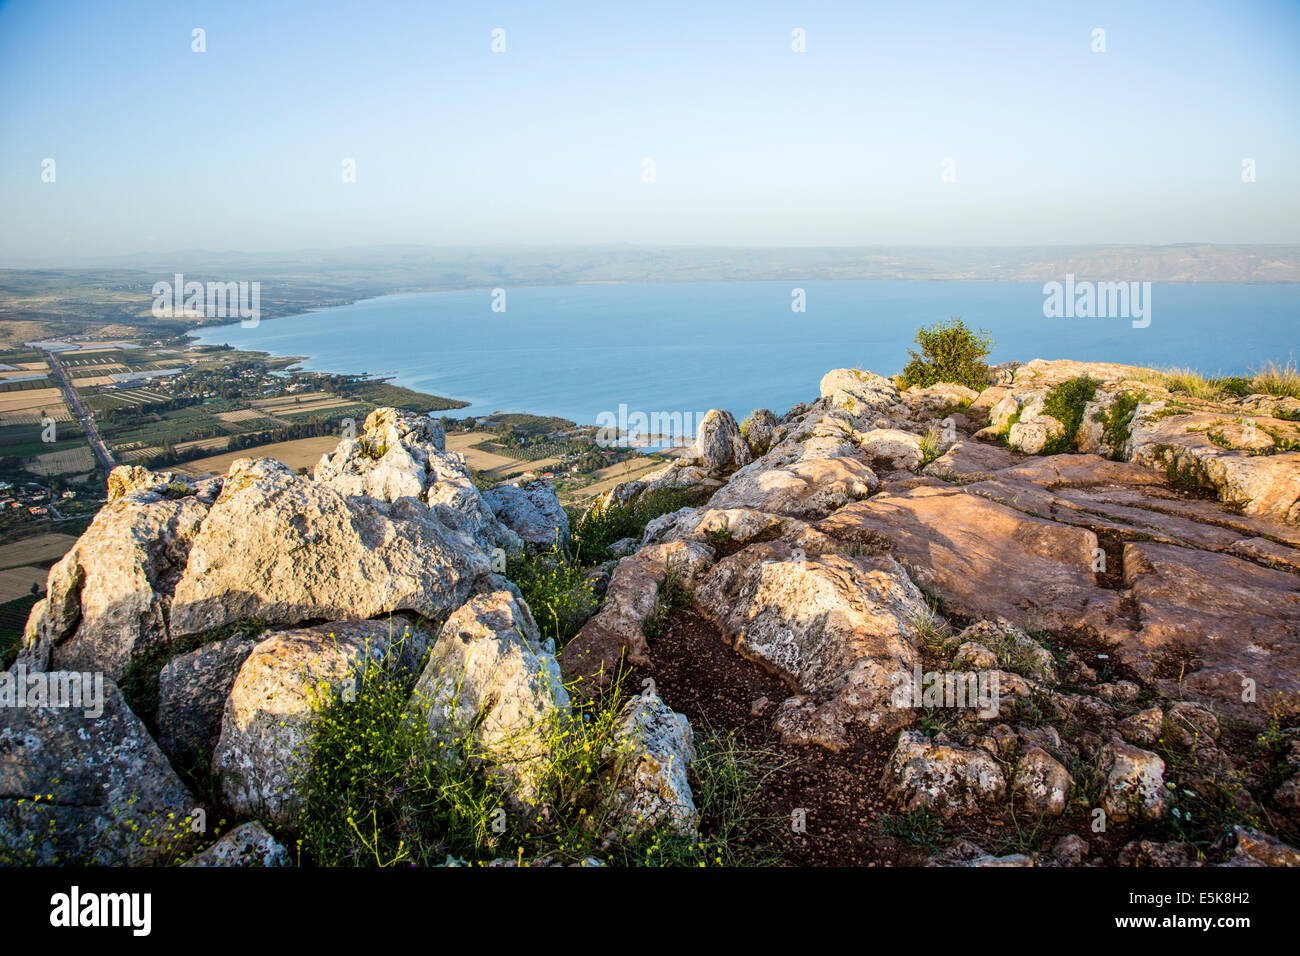 Israel, Lower Galilee, The Sea of Galilee as seen from Arbel mountain Stock Photo